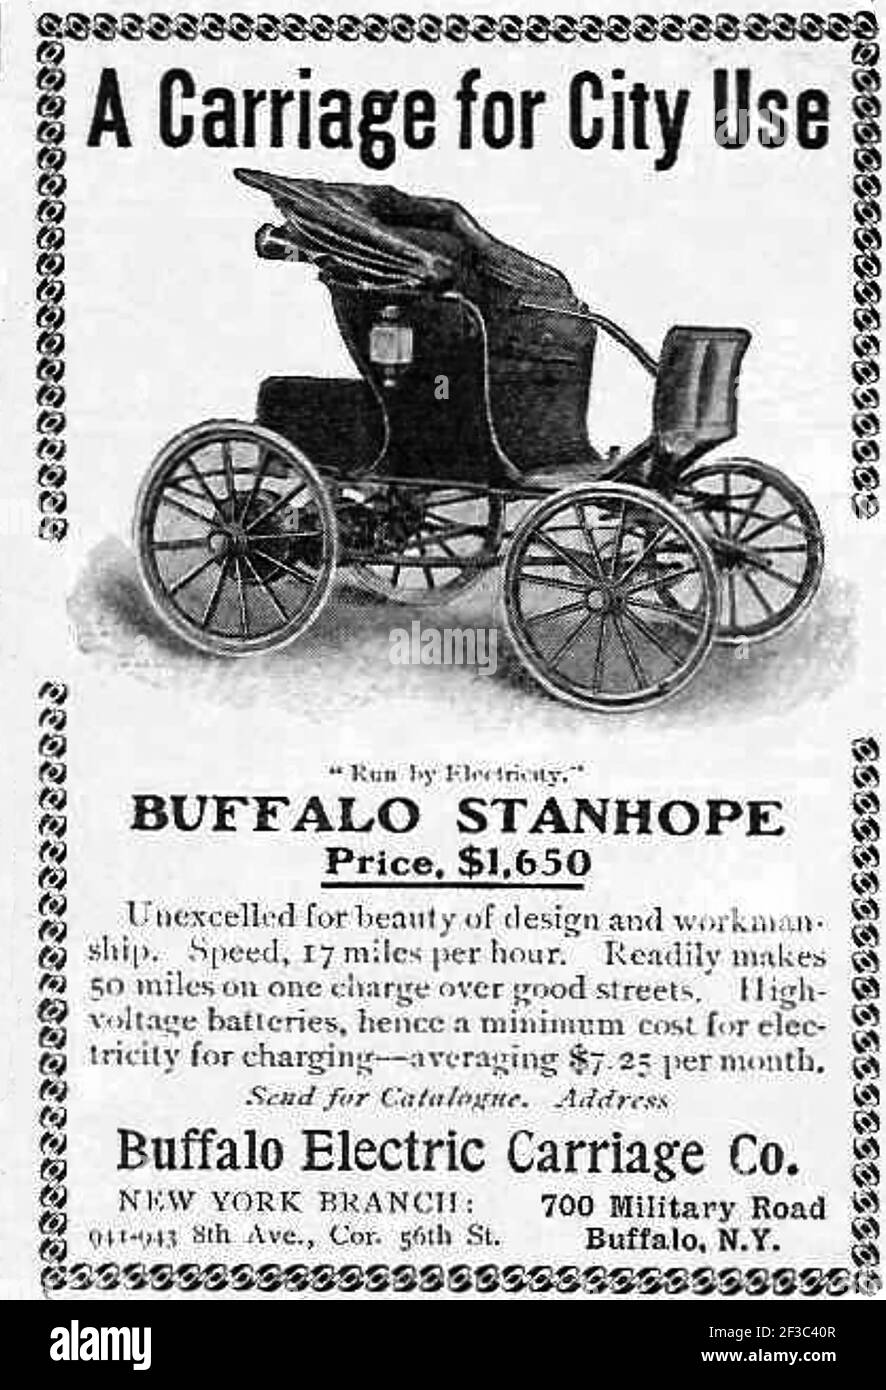 BUFFALO ELECTRIC CARRIAGE COMPANY, New York. A 1904 advert for their Stanhope model whjch produced 2.5 hp. Stock Photo